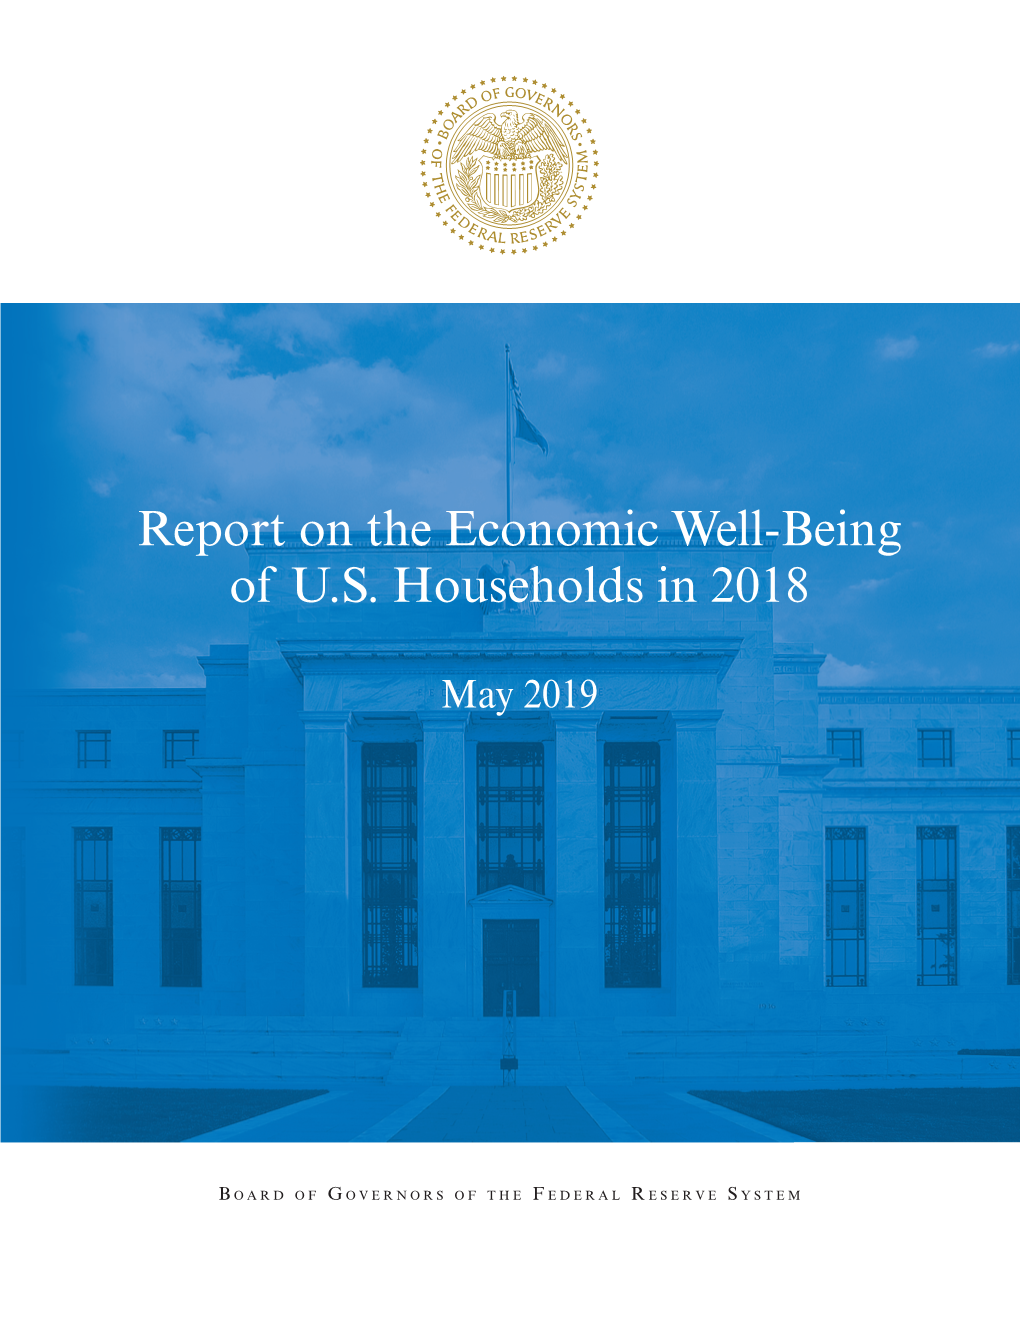 Report on the Economic Well-Being of U.S. Households in 2018